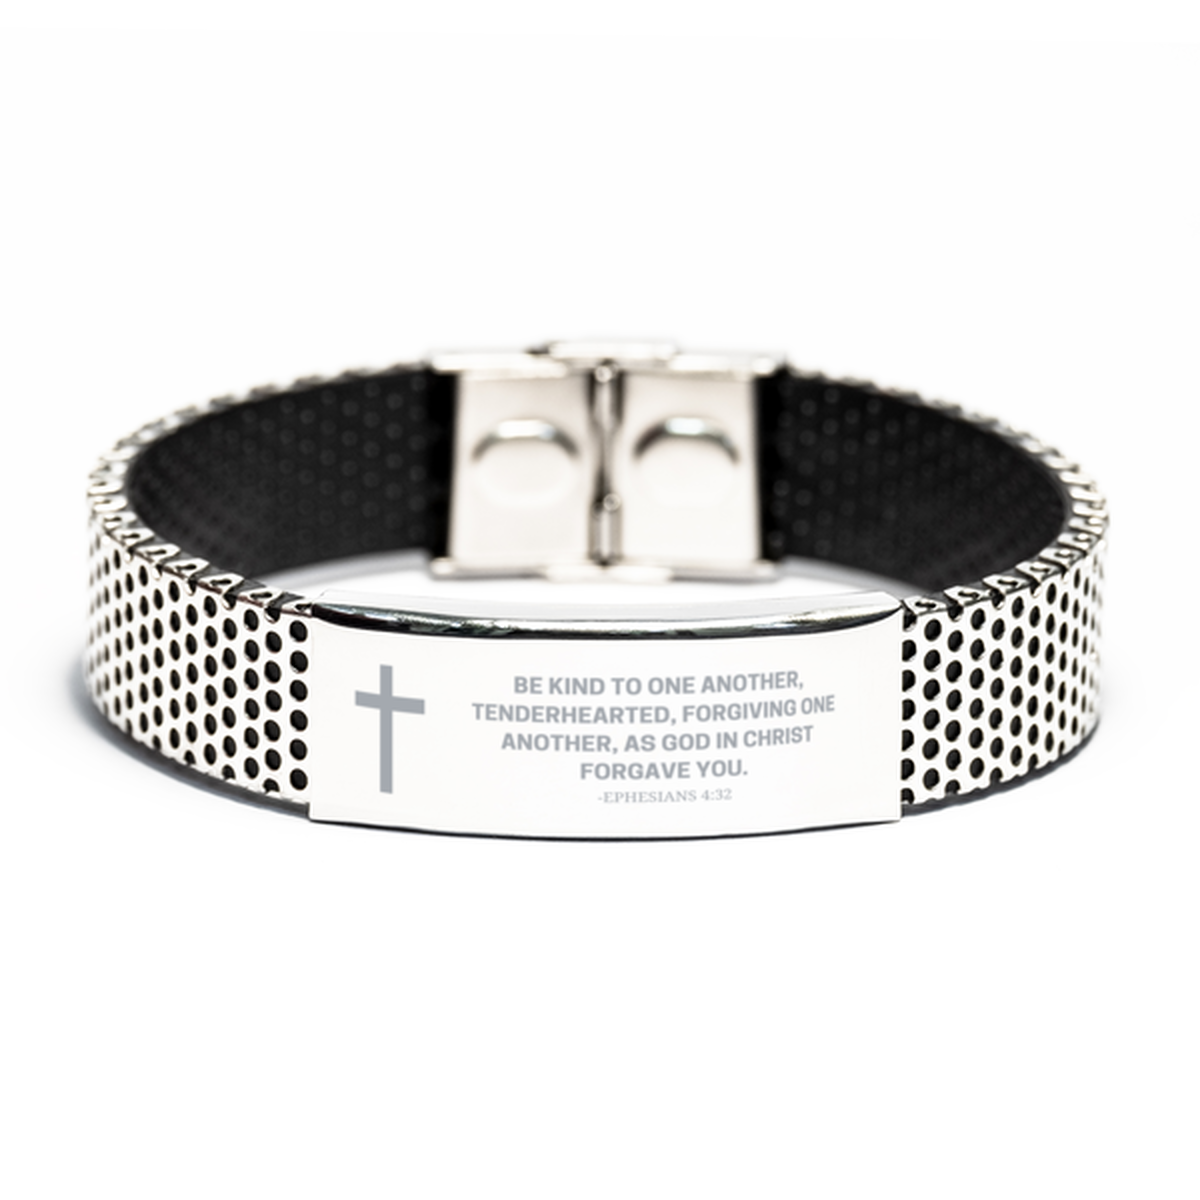 Baptism Gifts For Teenage Boys Girls, Christian Bible Verse Stainless Steel Bracelet, Be kind to one another, Catholic Confirmation Gifts for Son, Godson, Grandson, Nephew